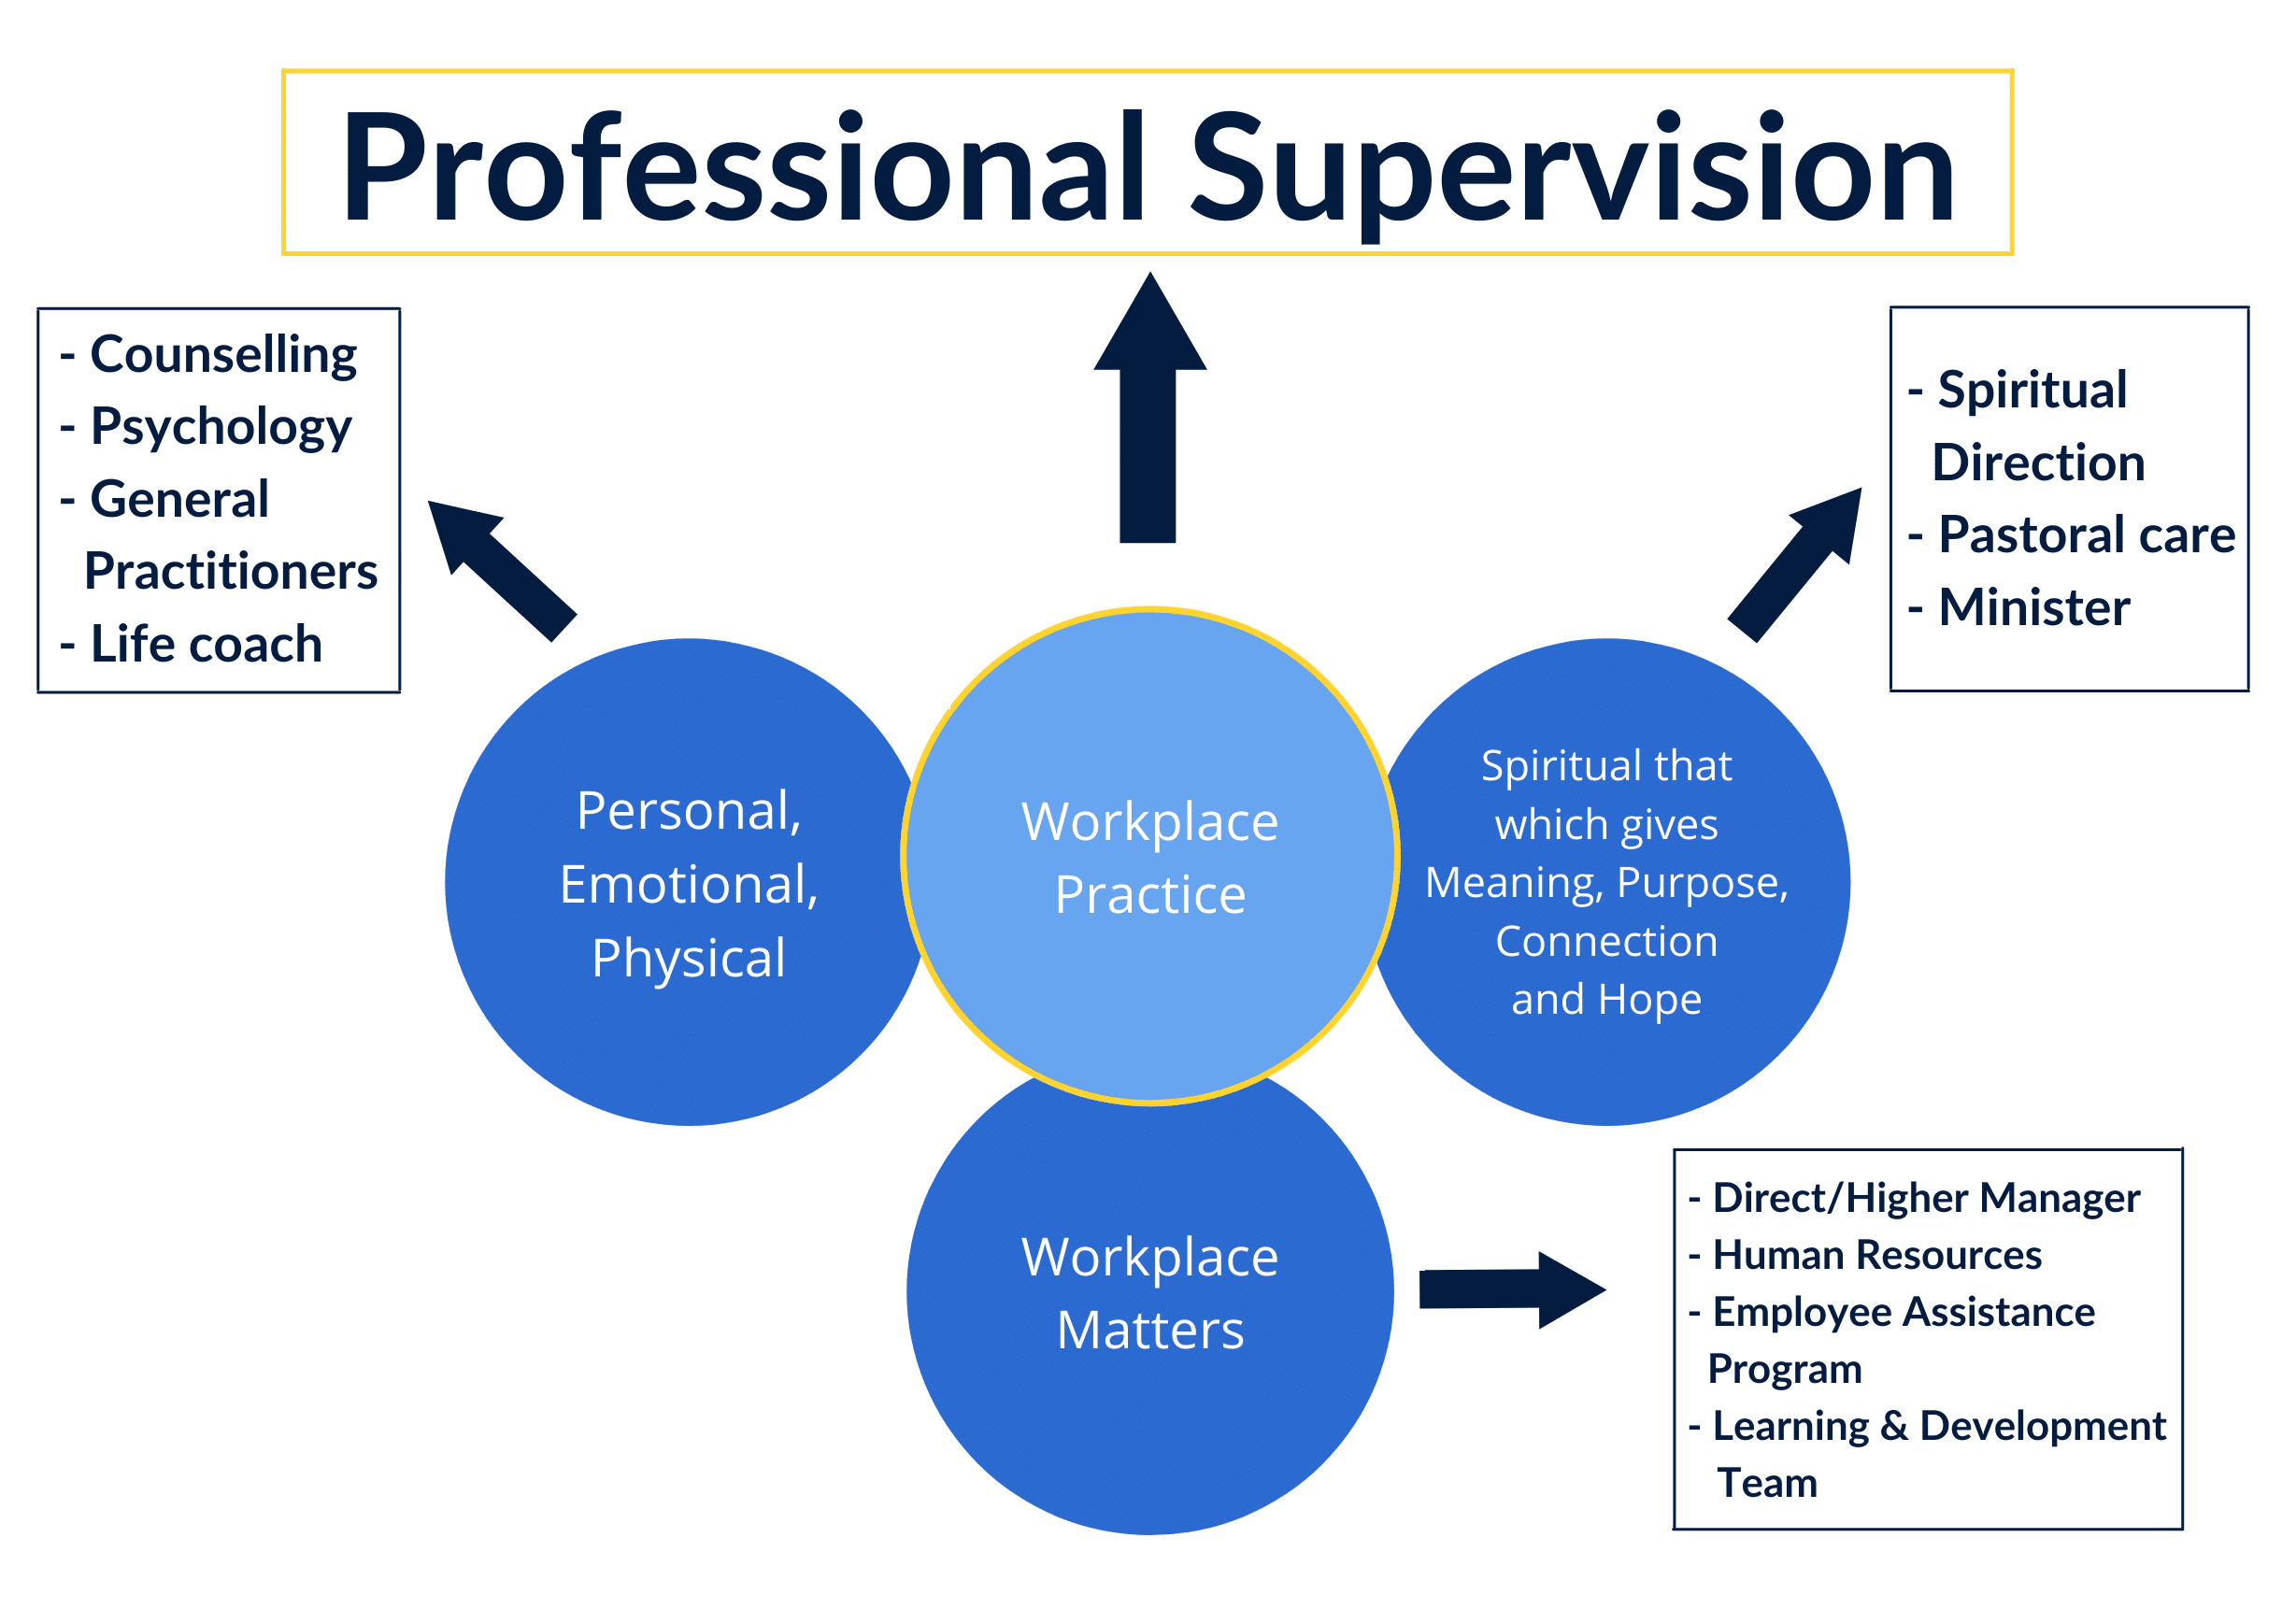 Role of Professional Supervision